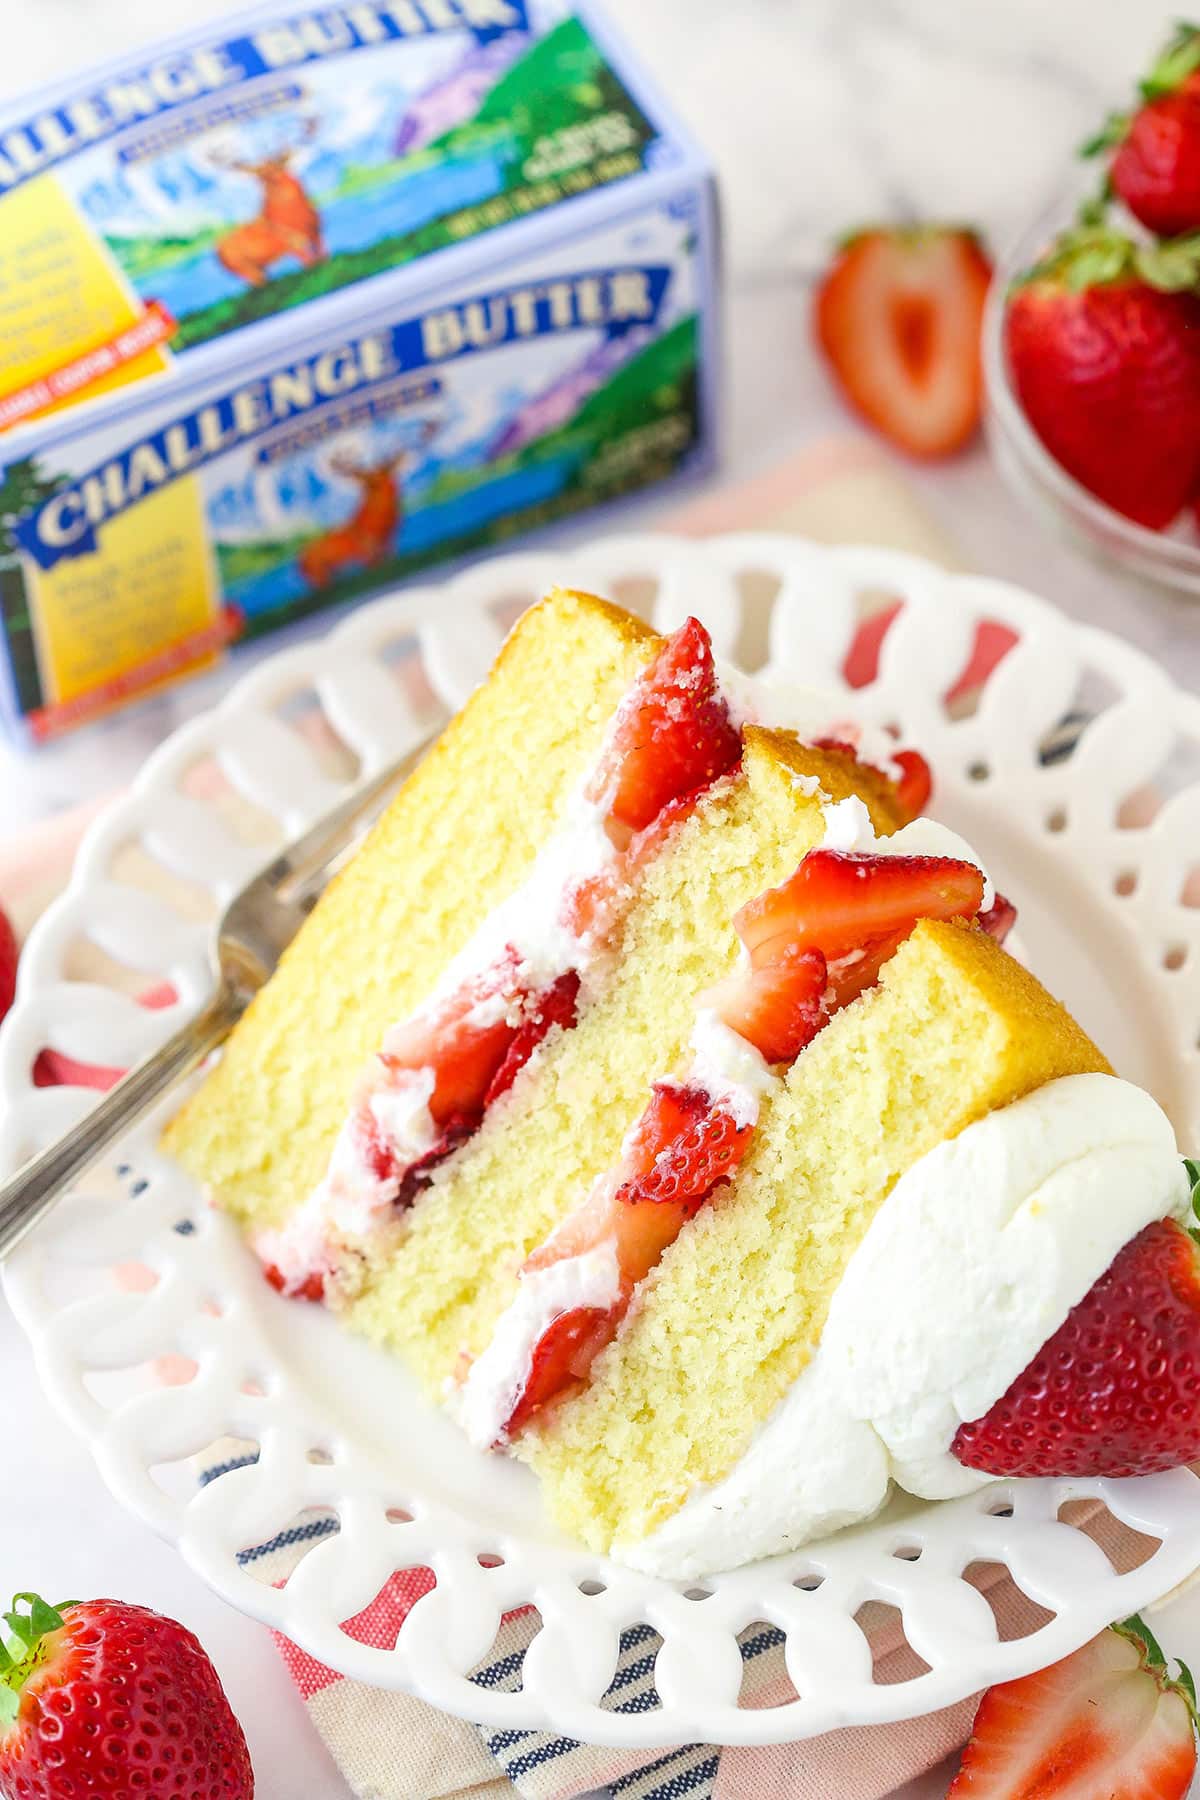 A slice of strawberry shortcake cake on a plate with a fork near a box of Challenge Butter.